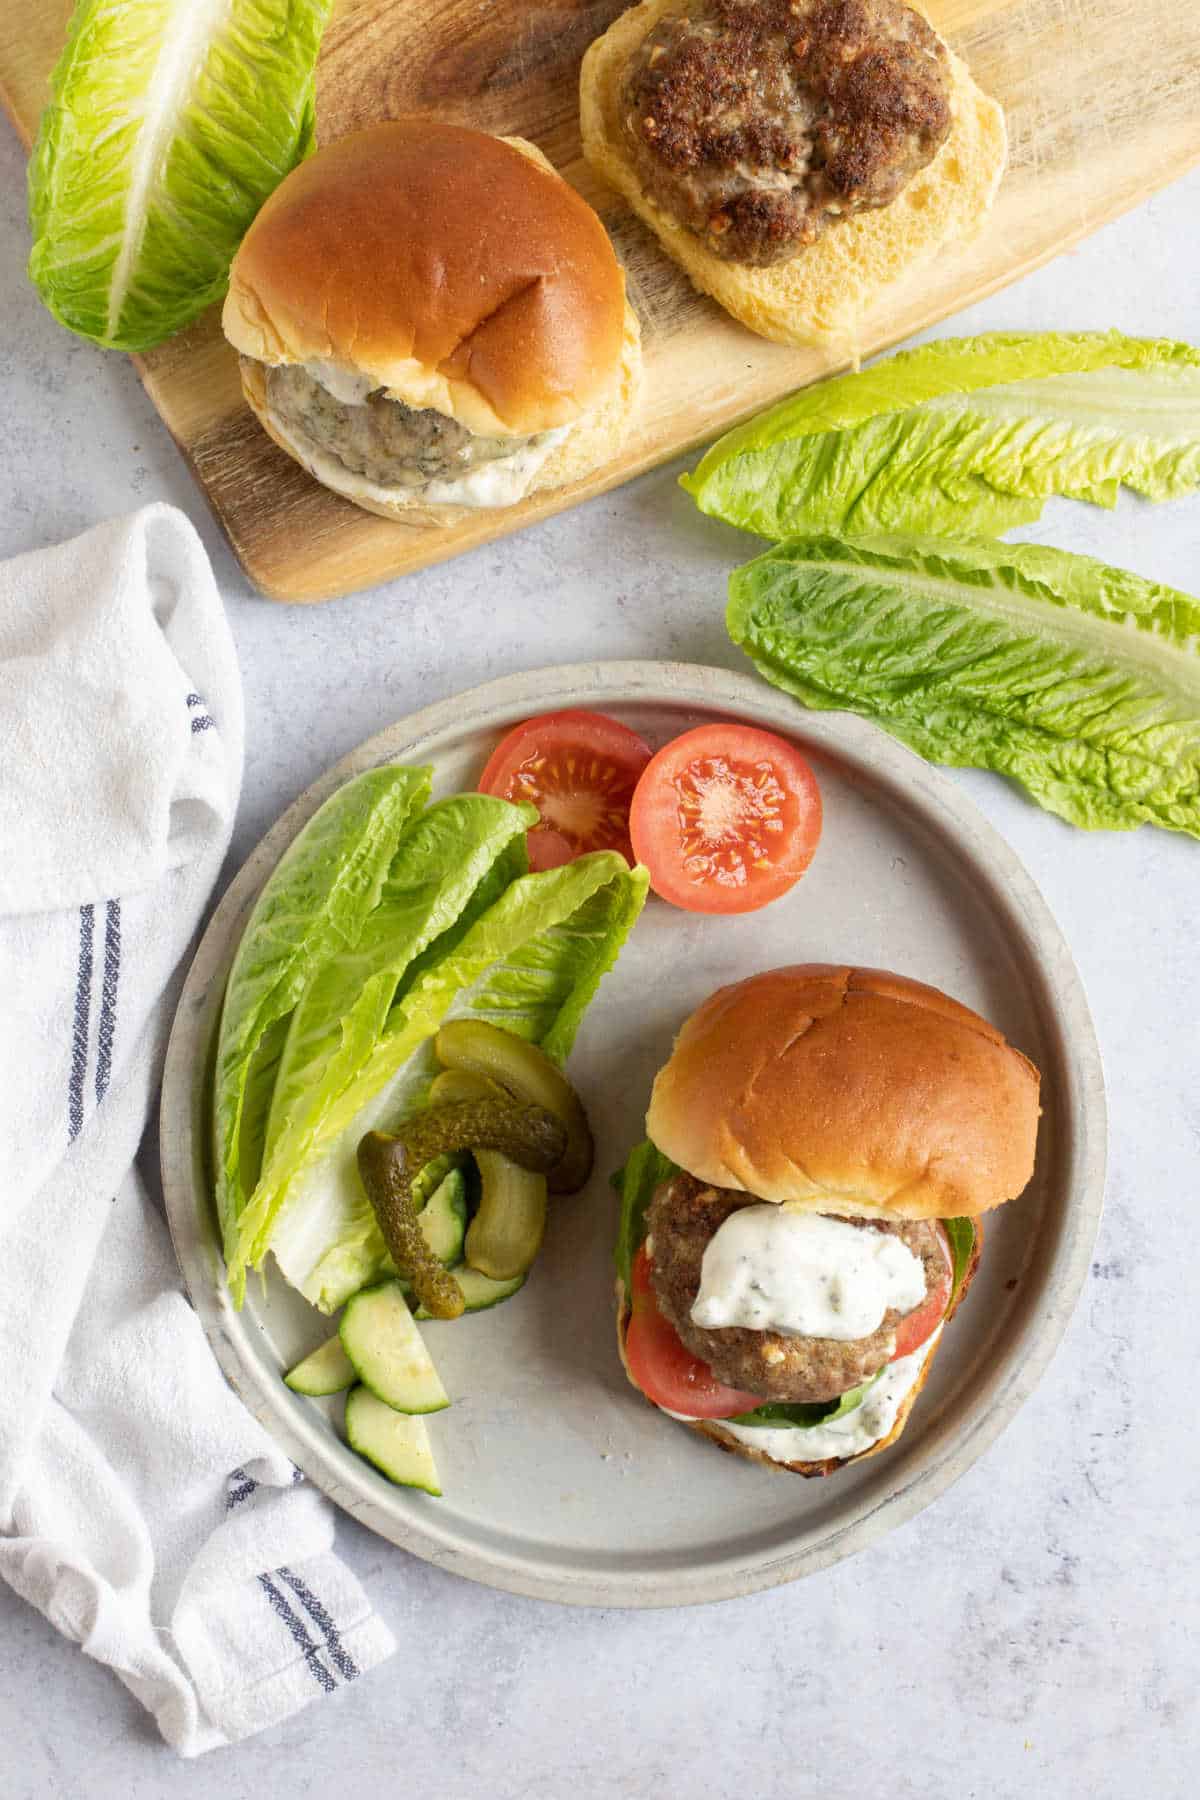 Lamb mince burgers served in brioche buns with salad.